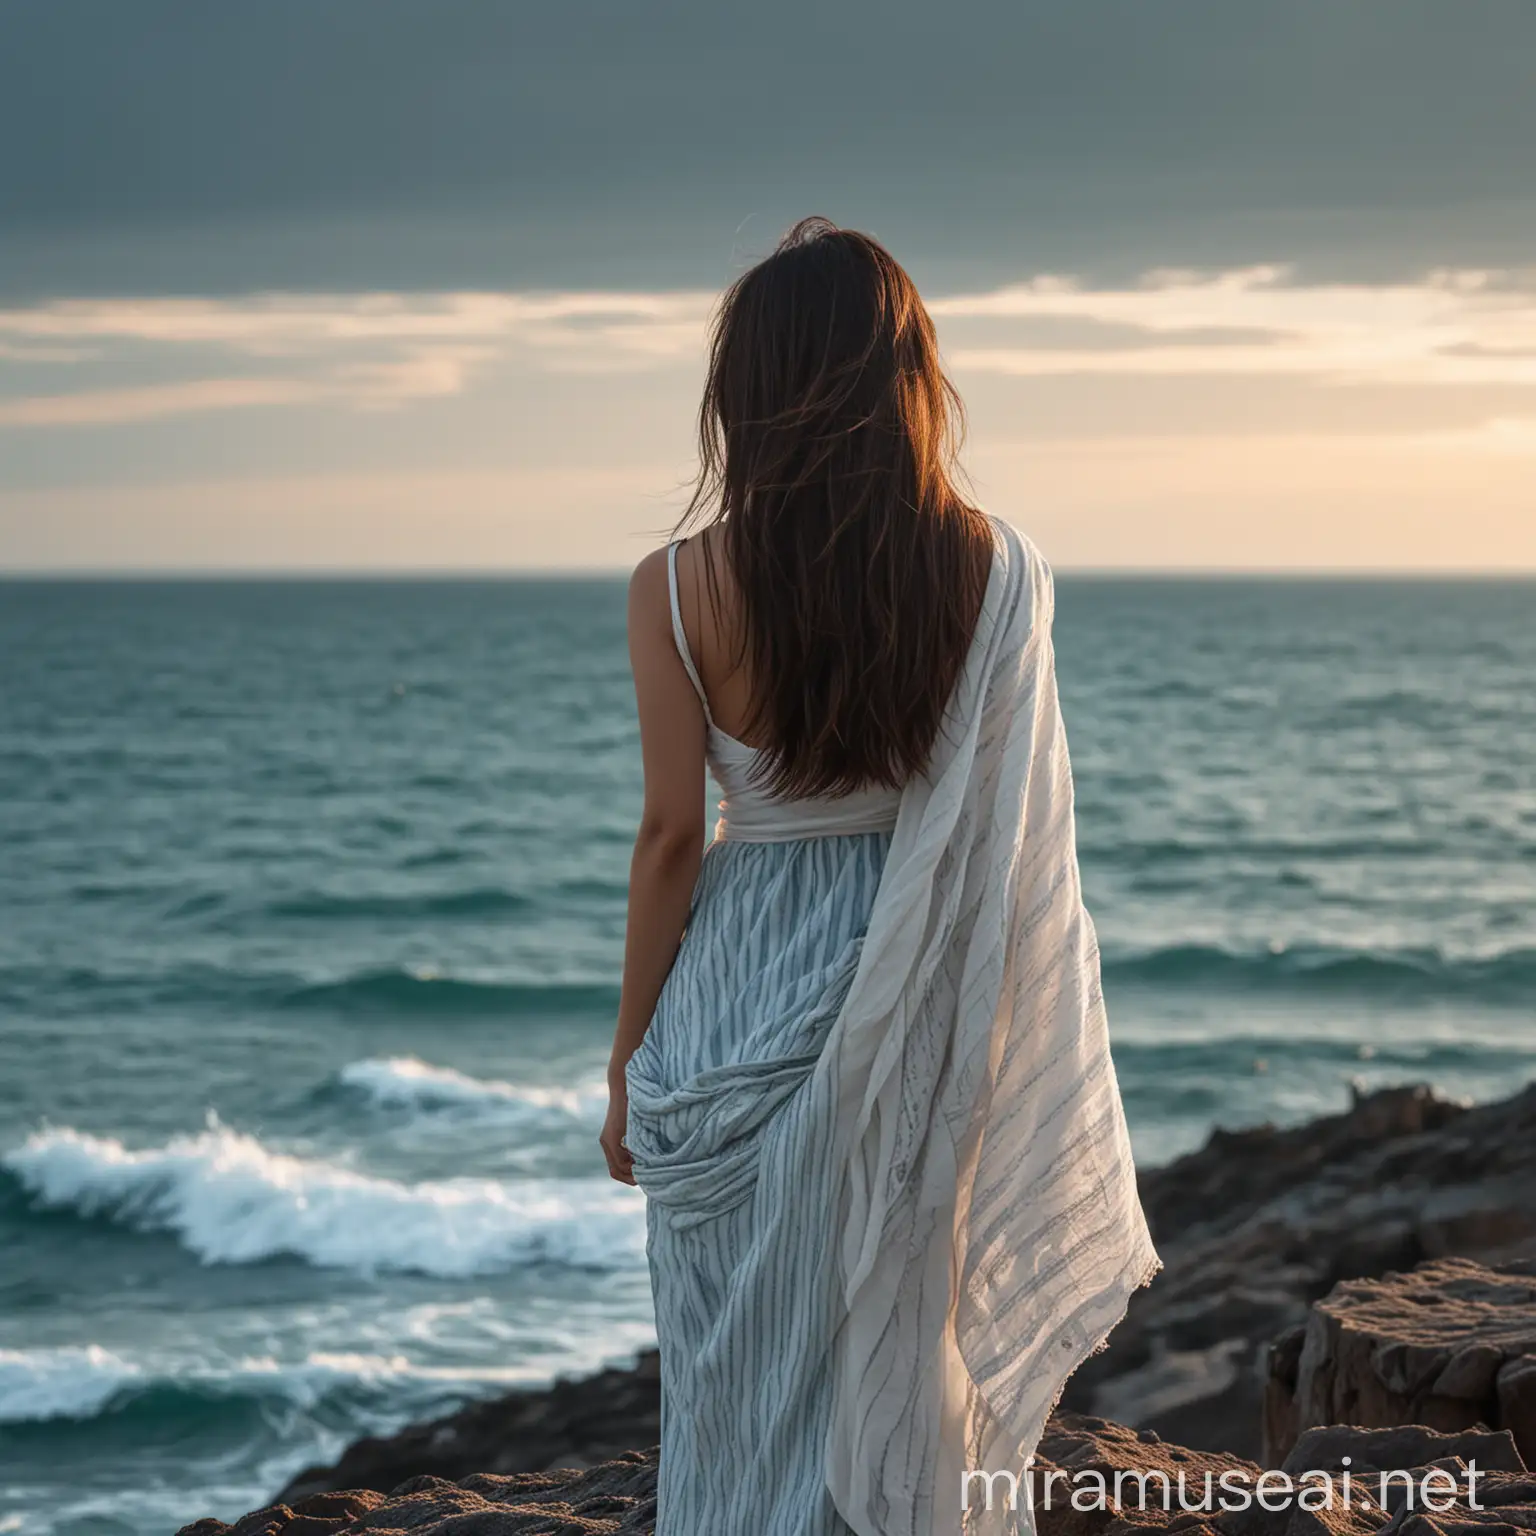 A serene seascape scene featuring a young Asian woman viewed from the back . She has long, straight brown hair reaching just past her shoulders.She was looking out over the sea. She is wearing a loose, white shawl over a striped, sleeveless top. The ocean in the background is calm, with hues of turquoise blending into a lighter blue under a clear sky. The foreground features rugged, dark rocks. A small ship is visible on the horizon. The atmosphere is peaceful and contemplative.Don't show her face.